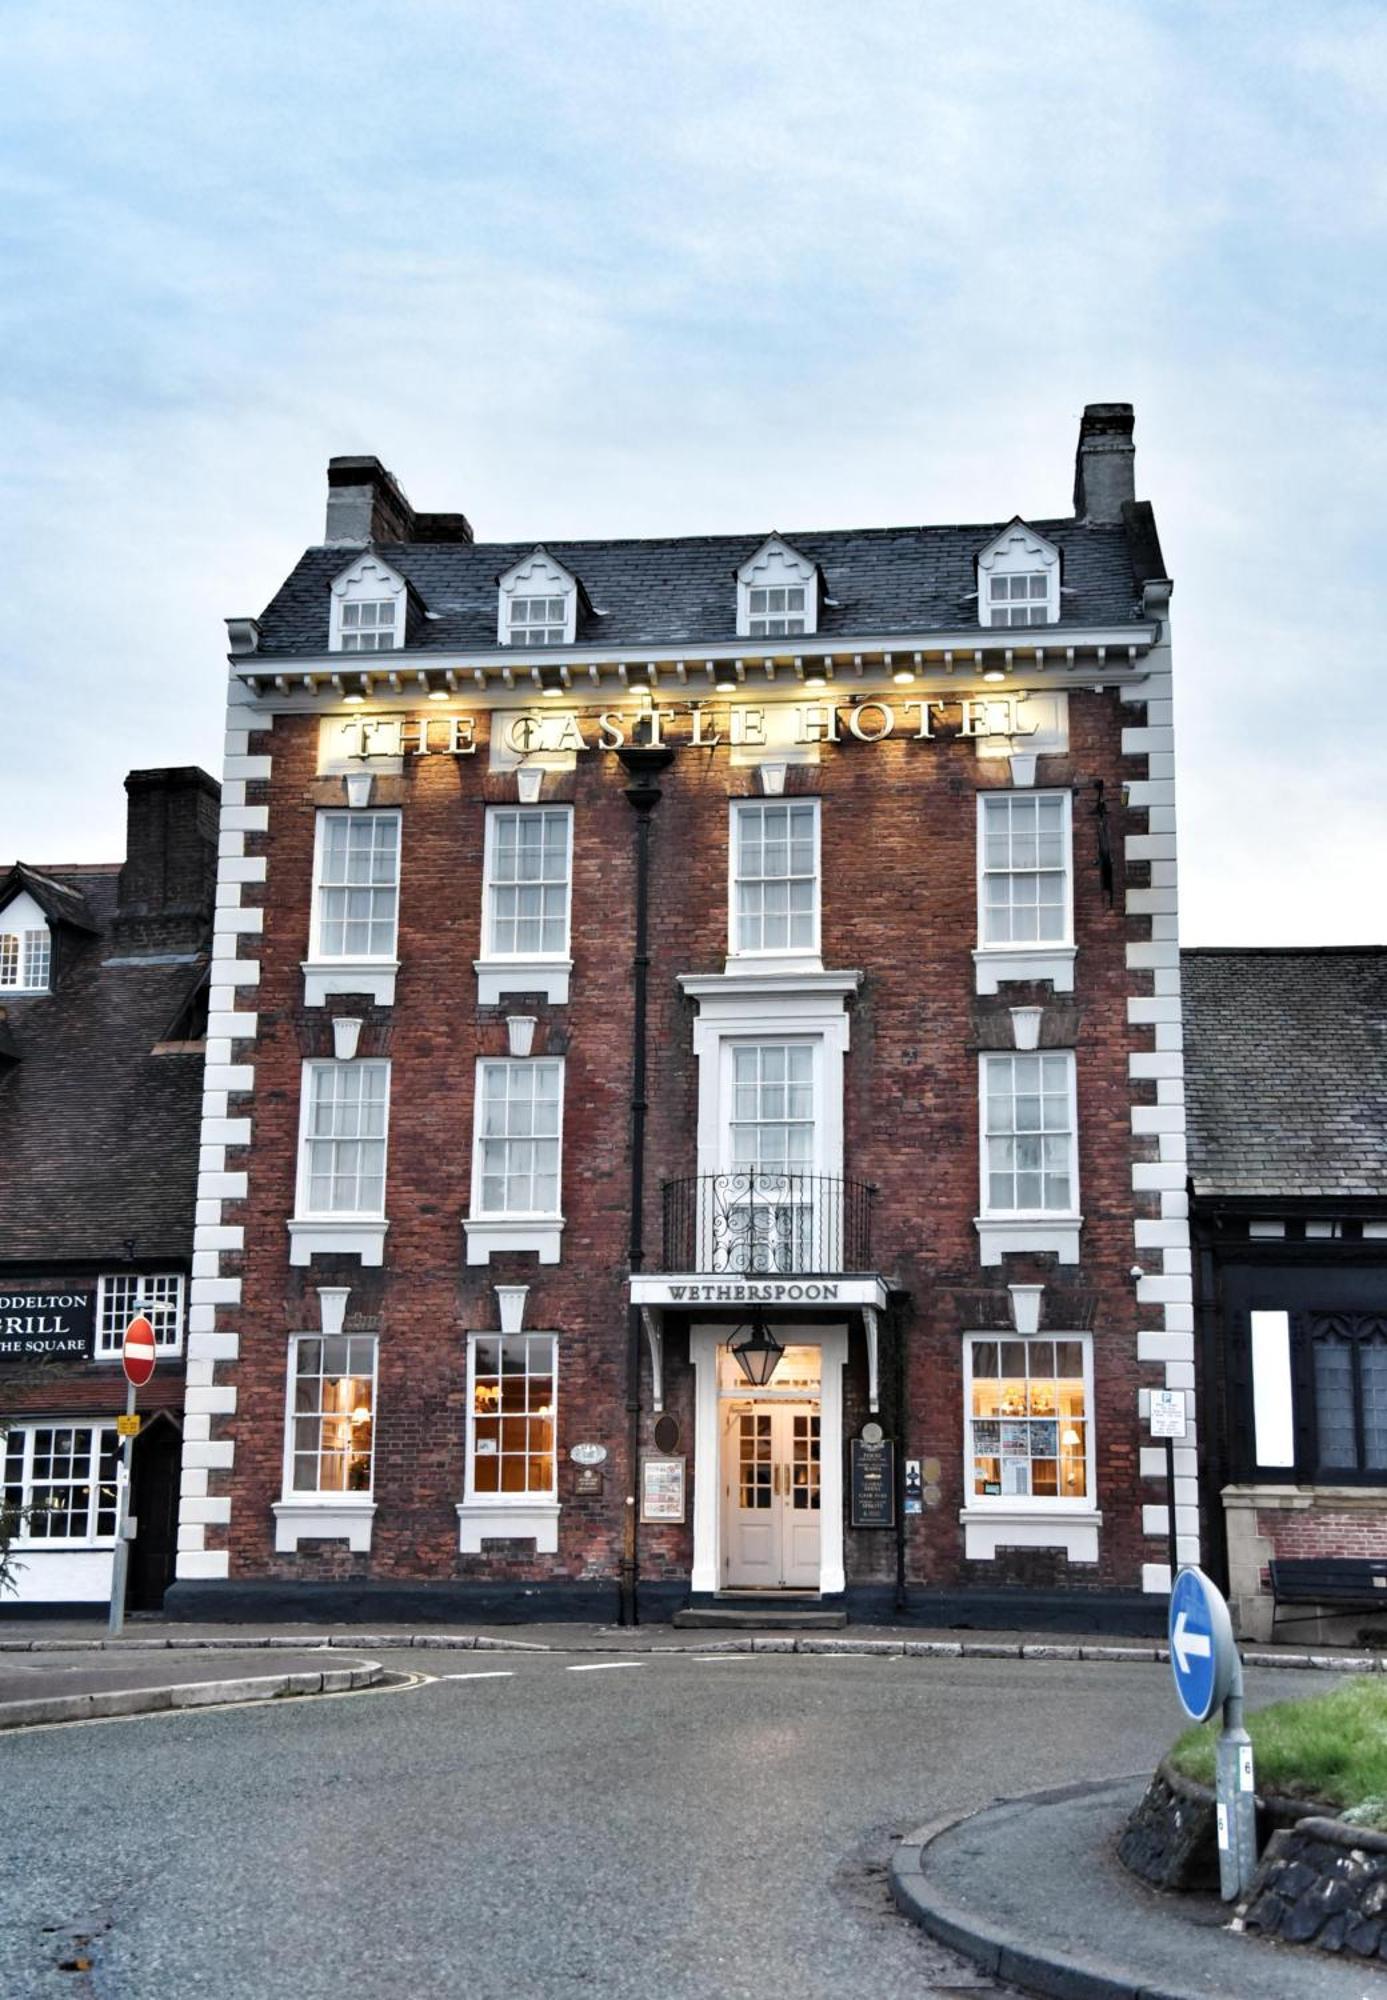 The Castle Hotel Wetherspoon Ruthin Exterior photo